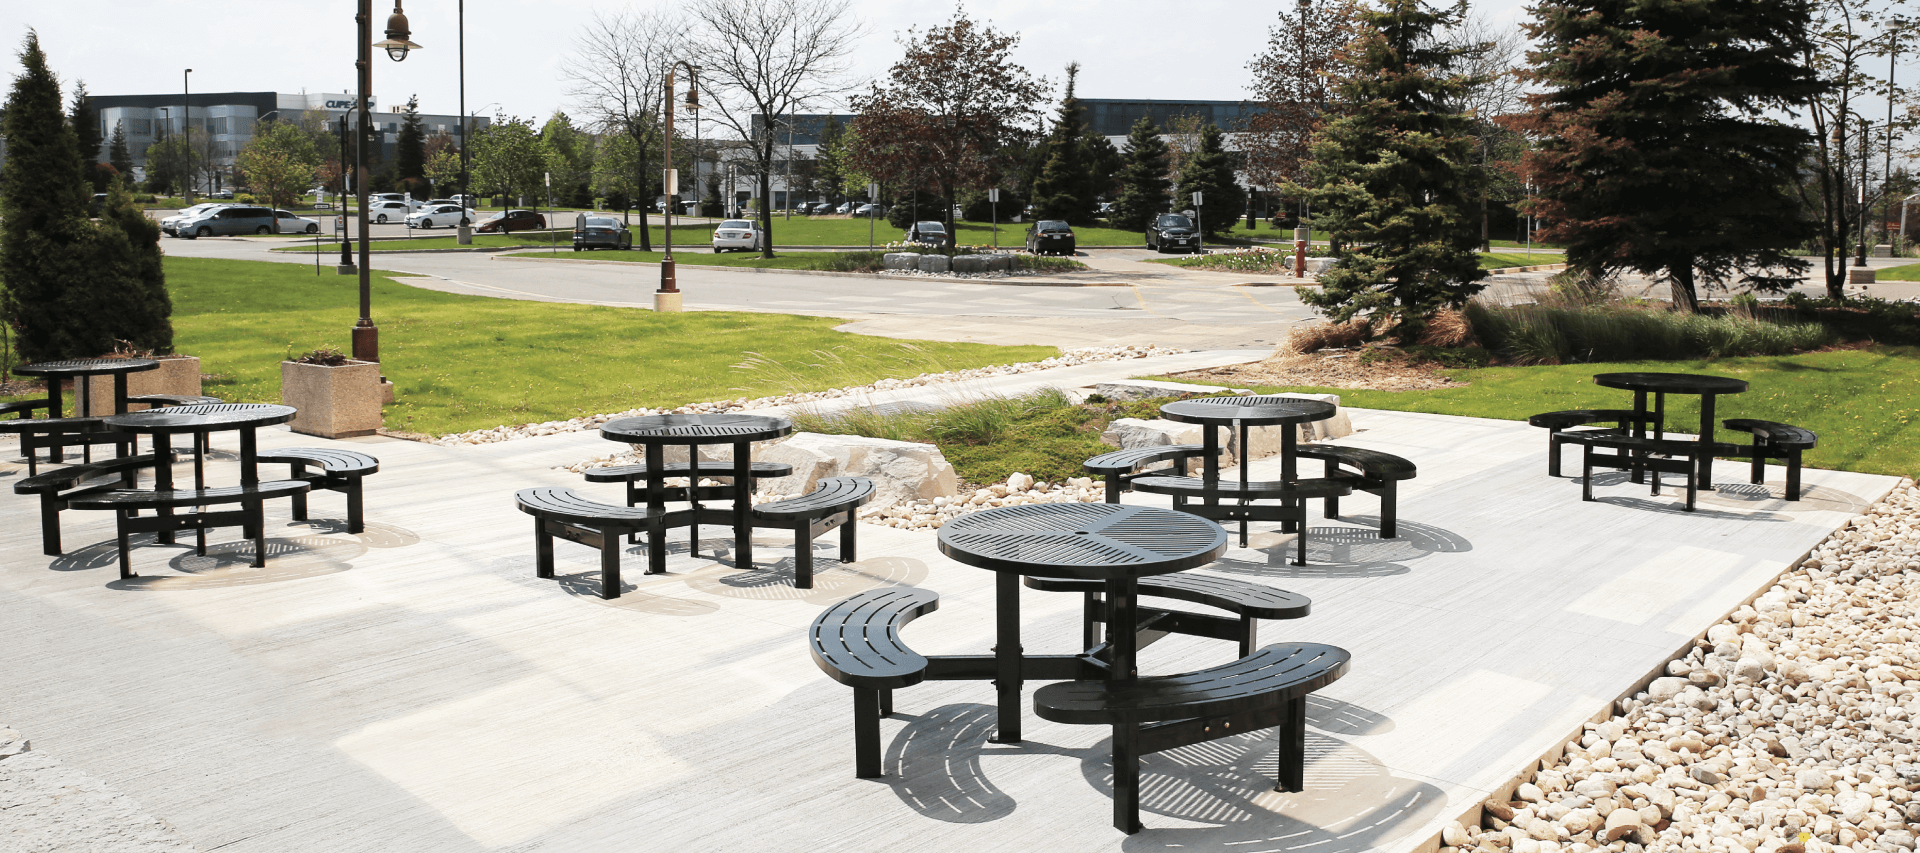 5 round shaped steel commercial picnic tables outside an office building